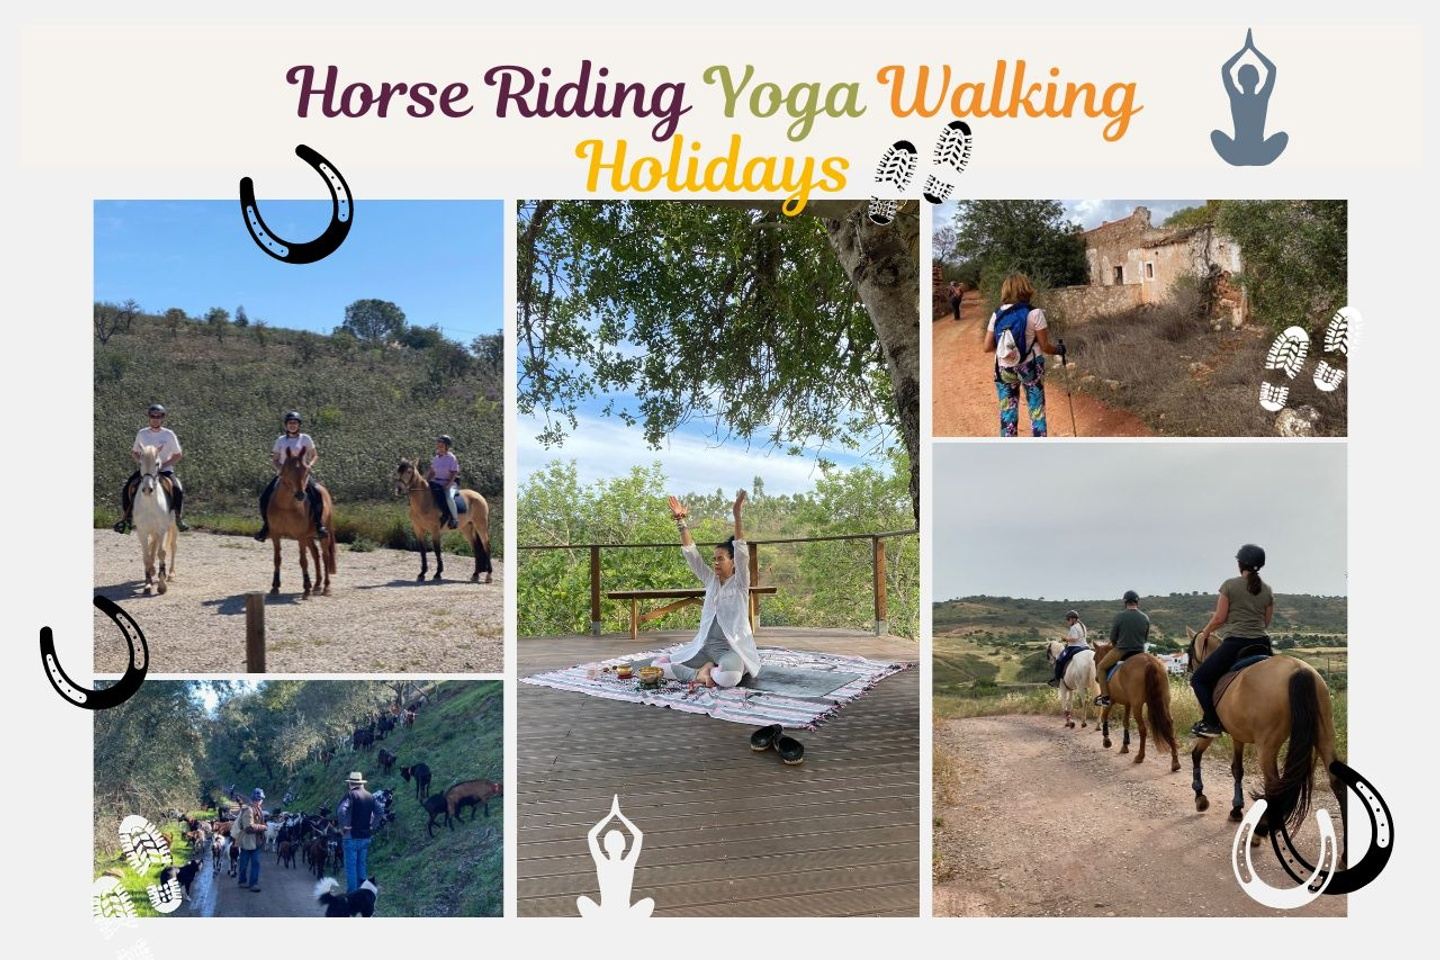 Algarve Horse Riding Hiking Yoga Holiday at Figs on the Funcho